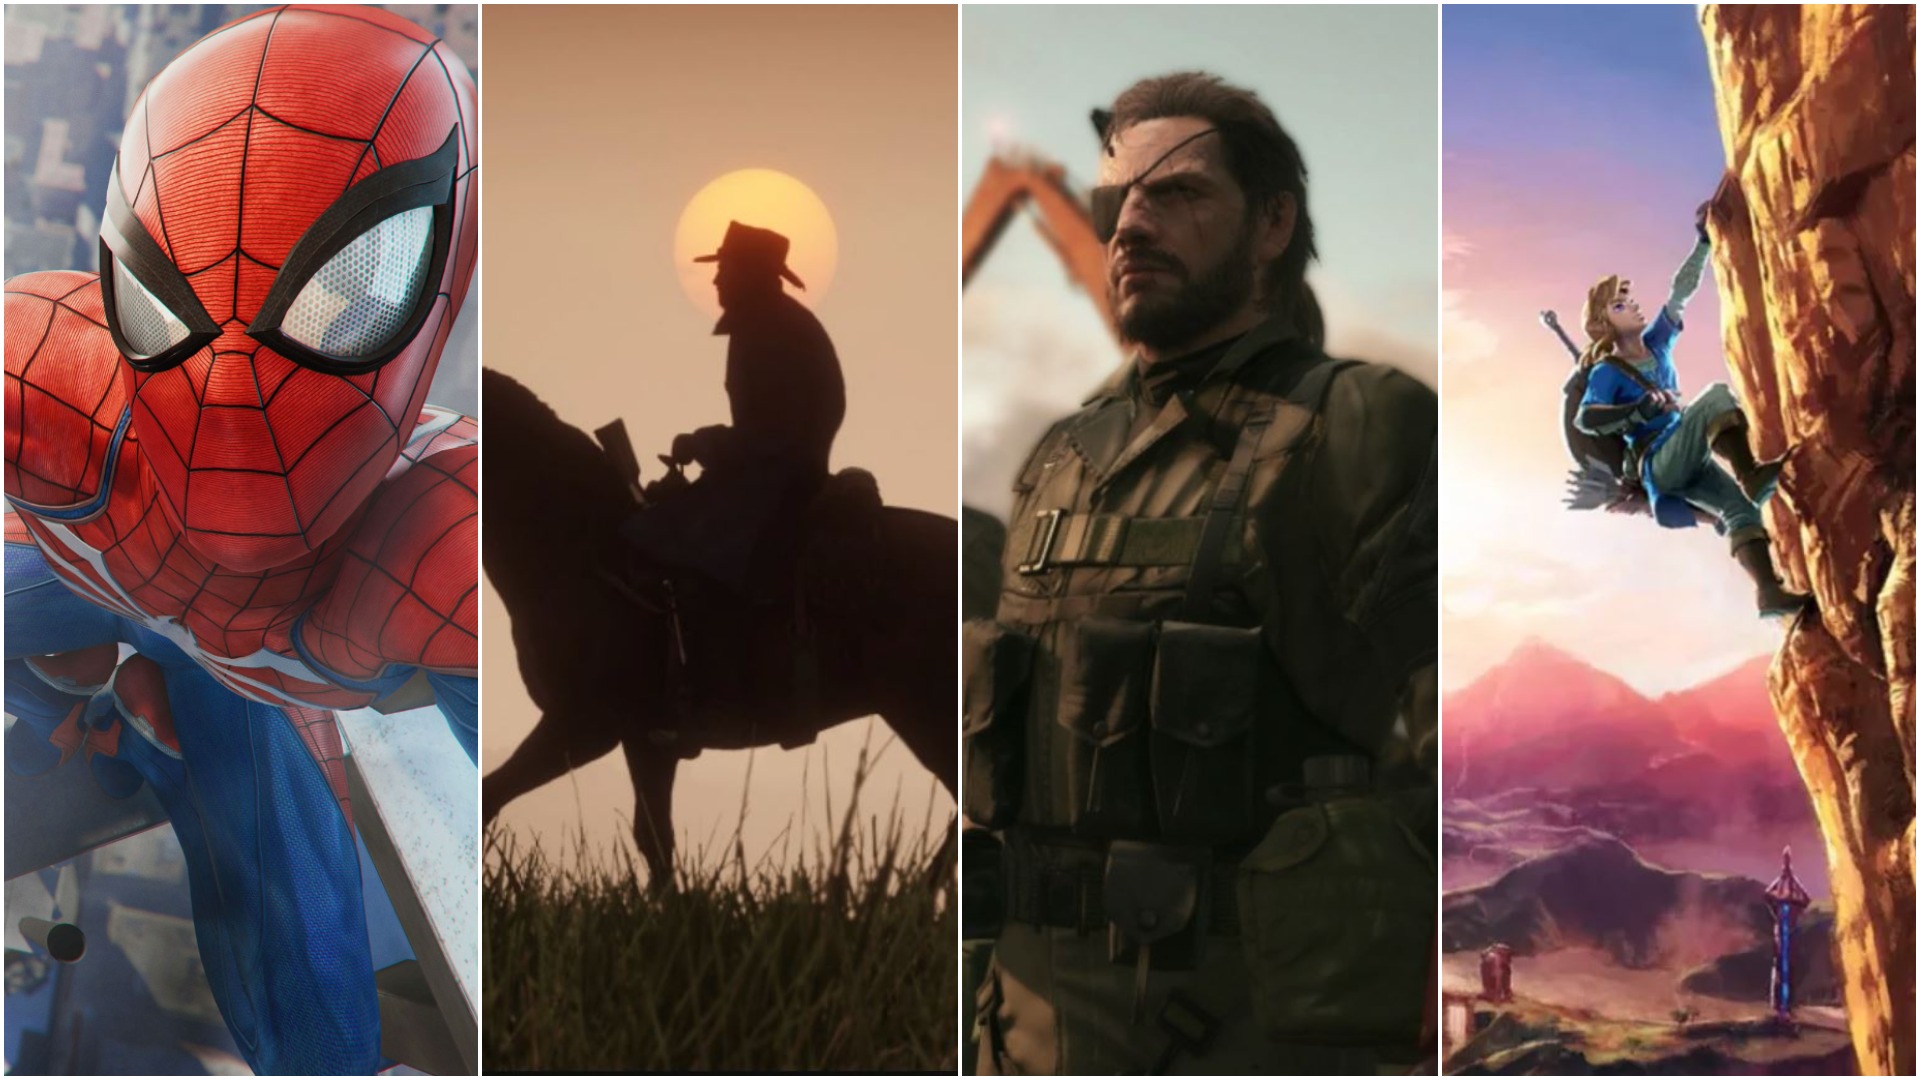 IGN's top ten open world games of all time. Thoughts? : r/gaming